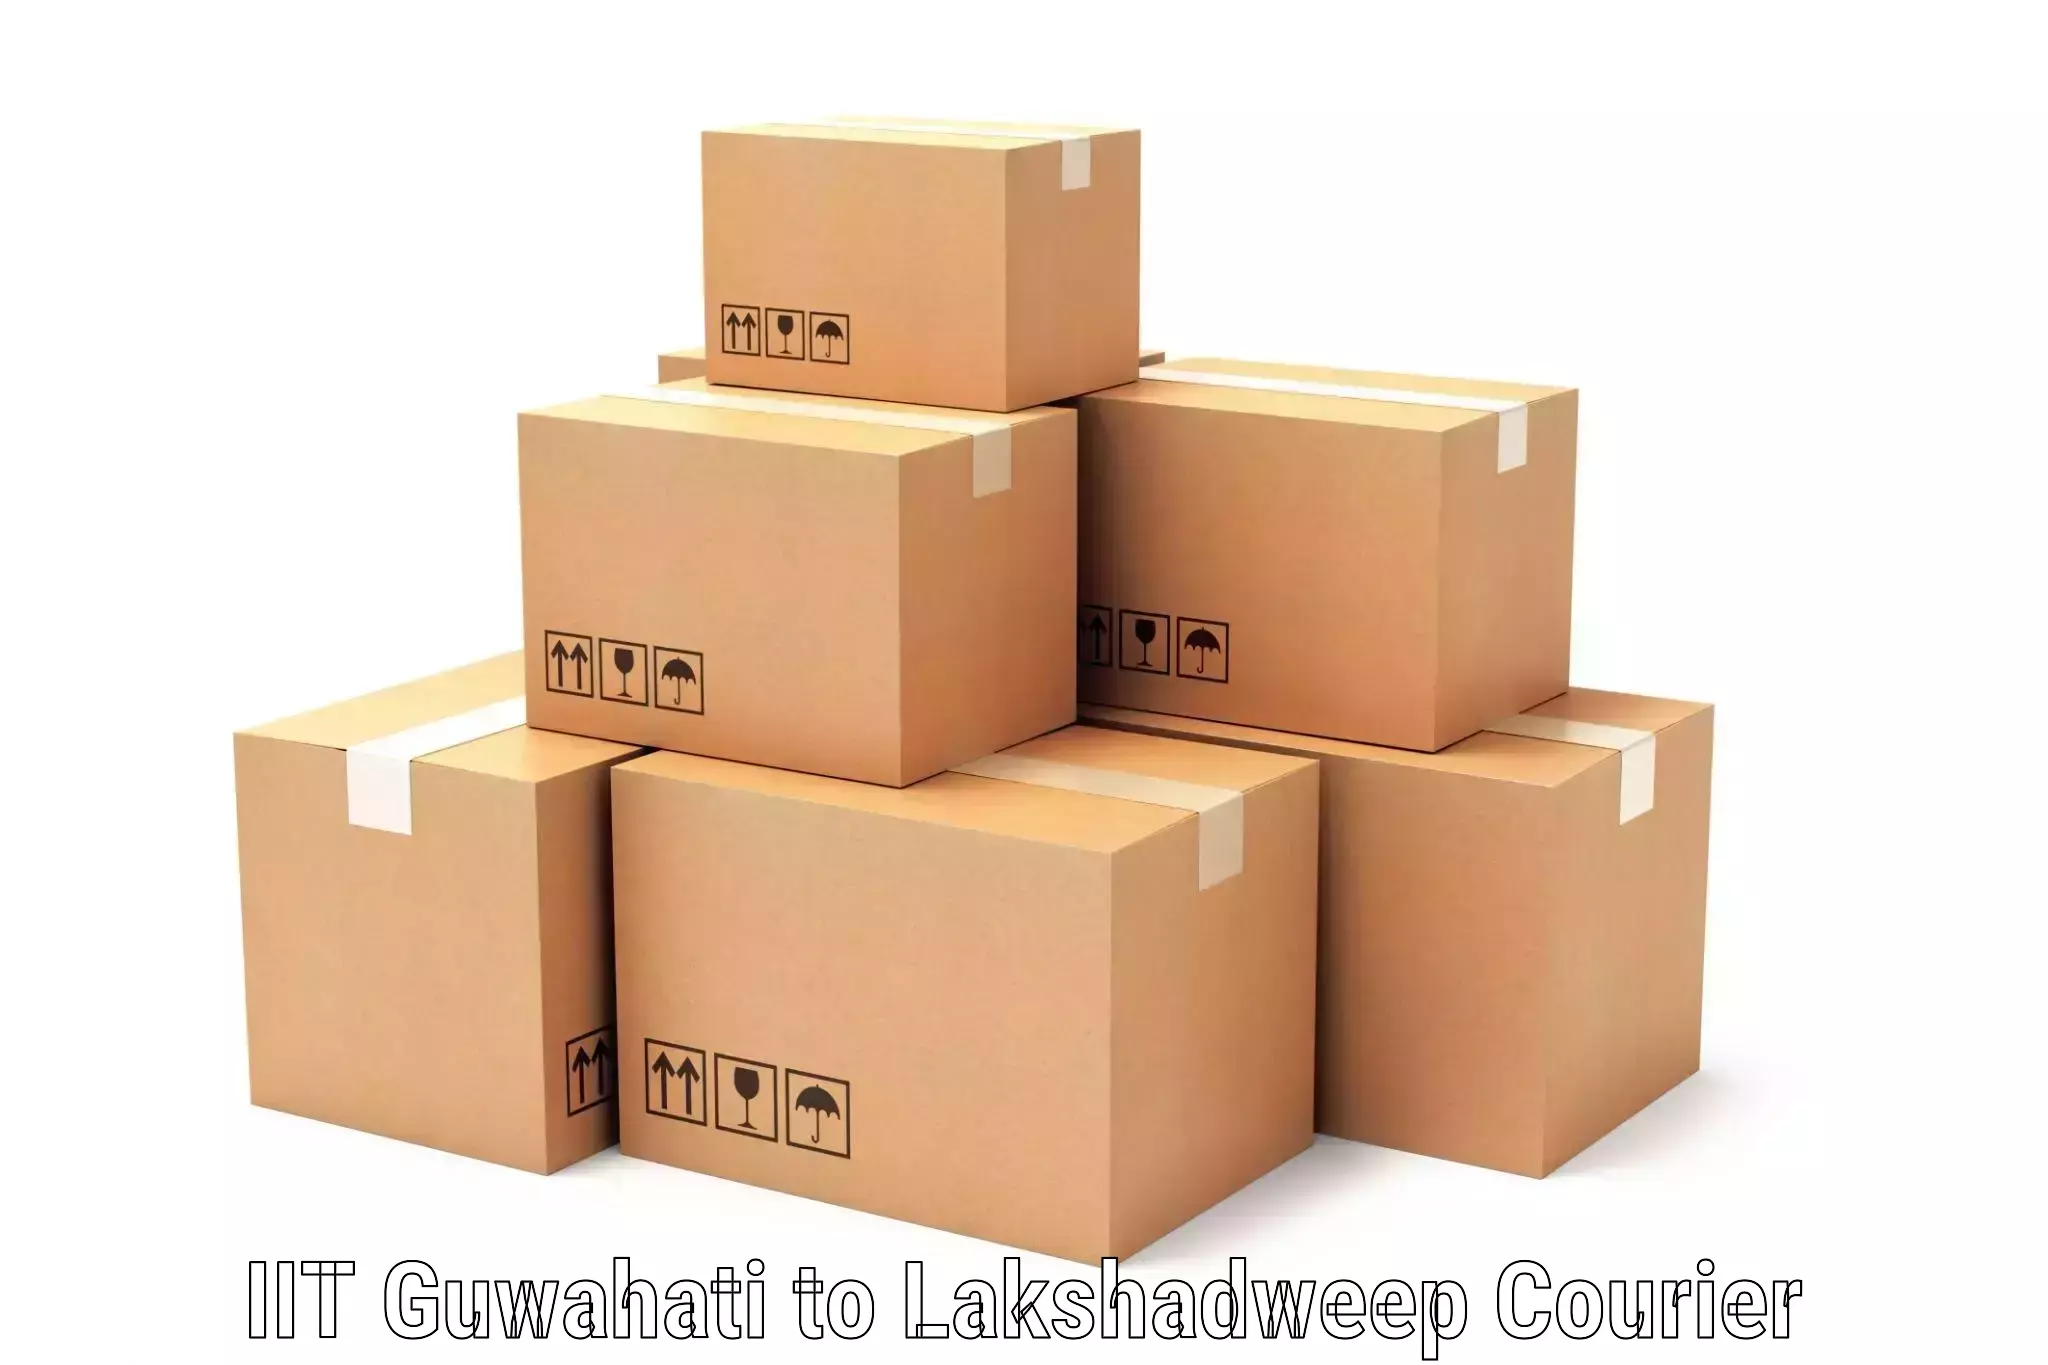 State-of-the-art courier technology IIT Guwahati to Lakshadweep